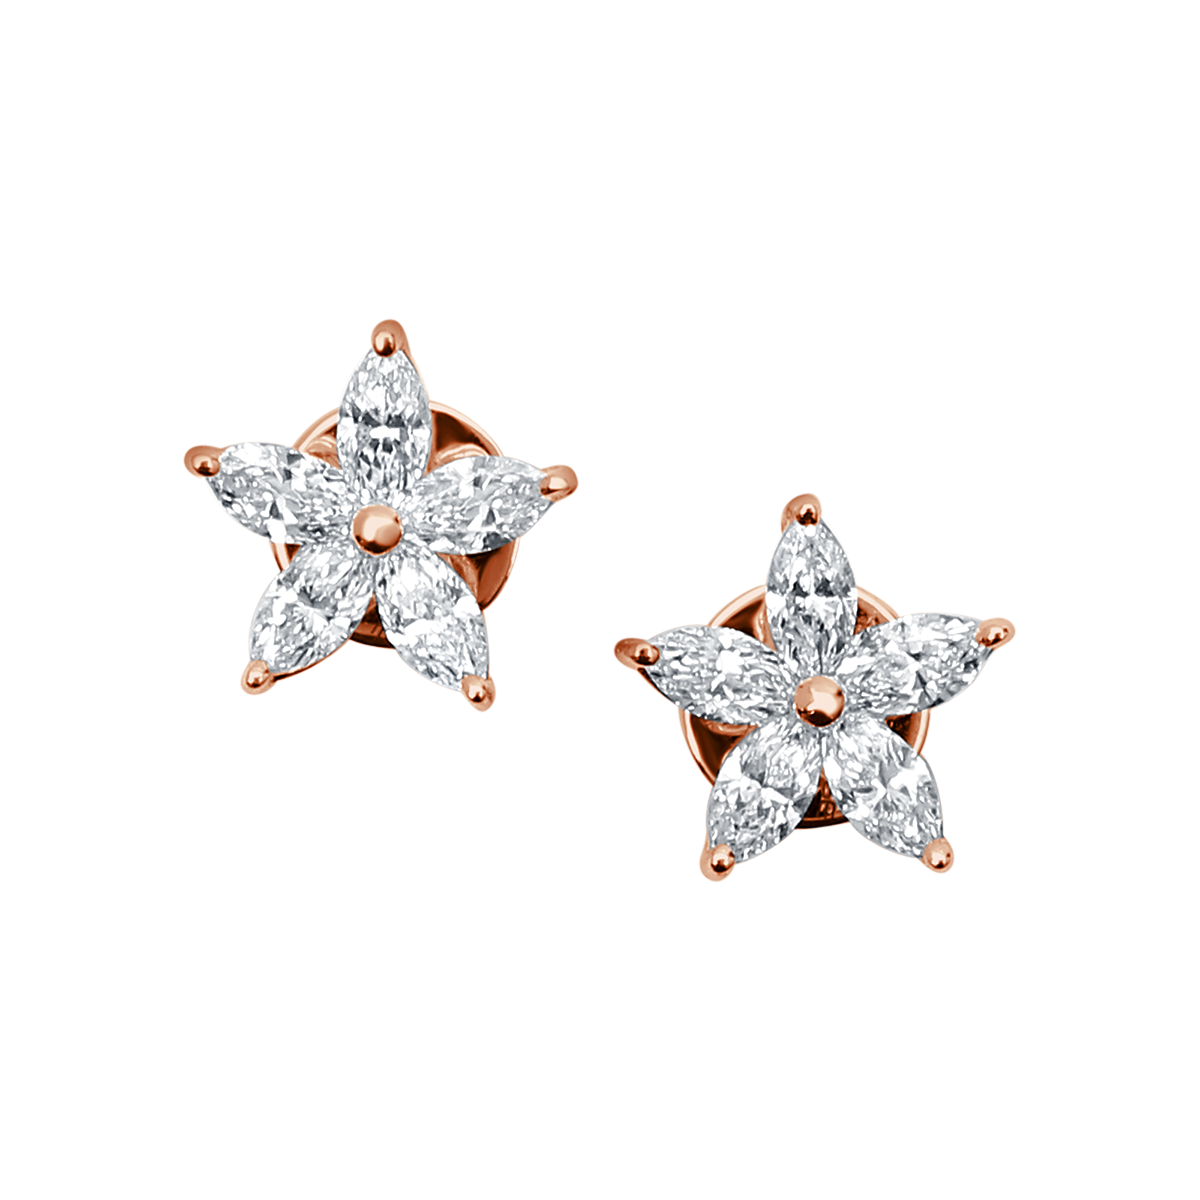 Five Marquise Diamond Earring From Ava Collection